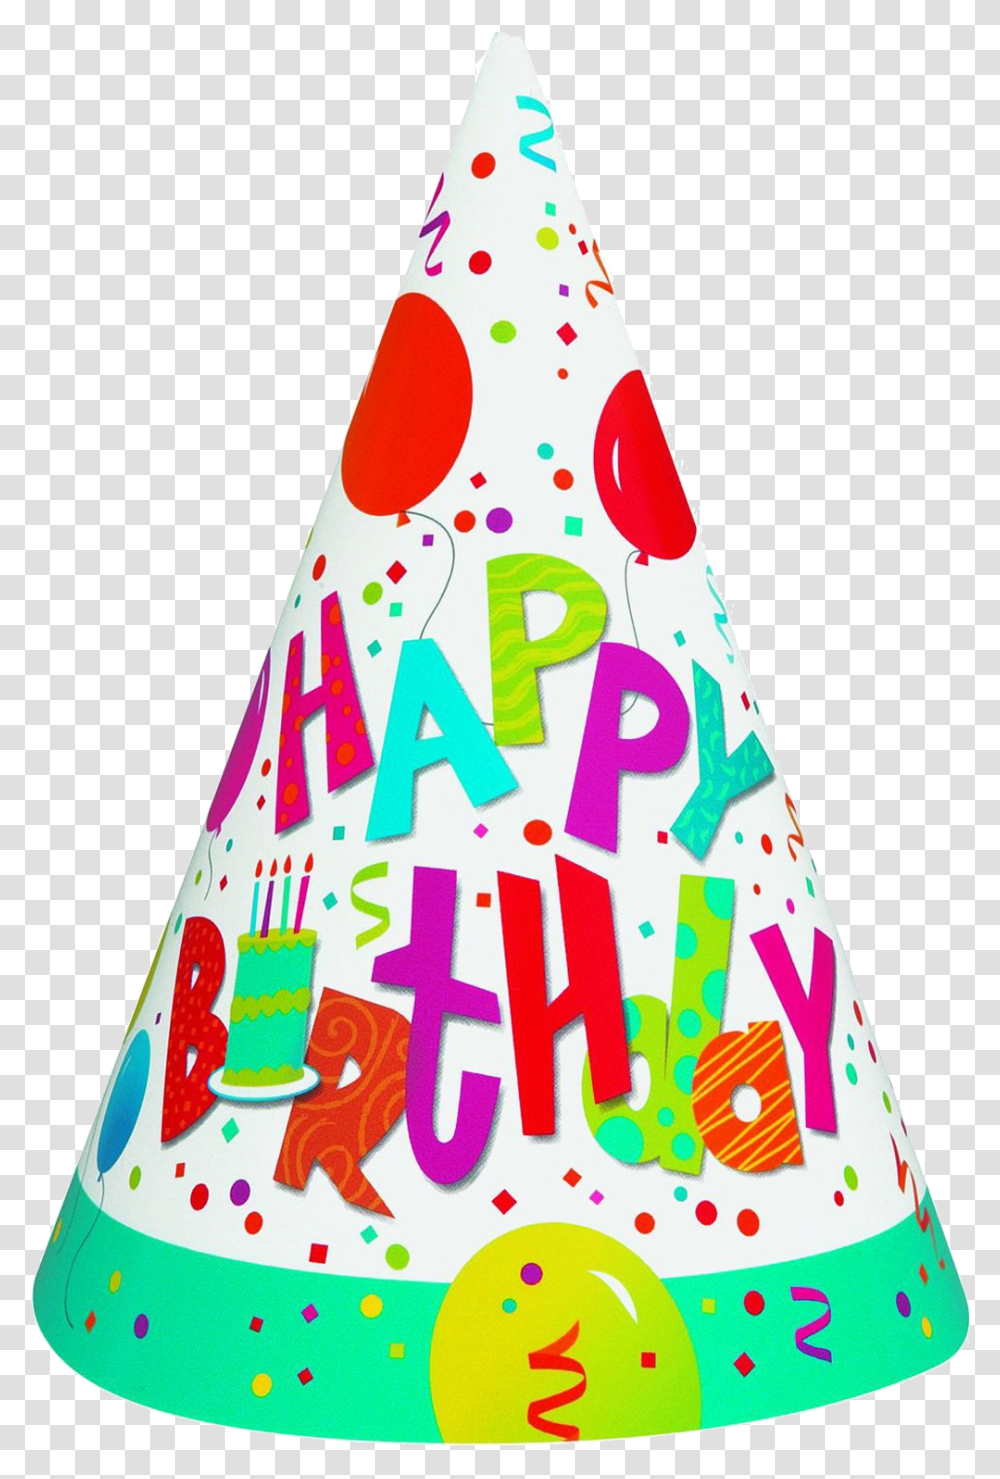 Because My Birthday Is On New Years, Apparel, Party Hat, Birthday Cake Transparent Png